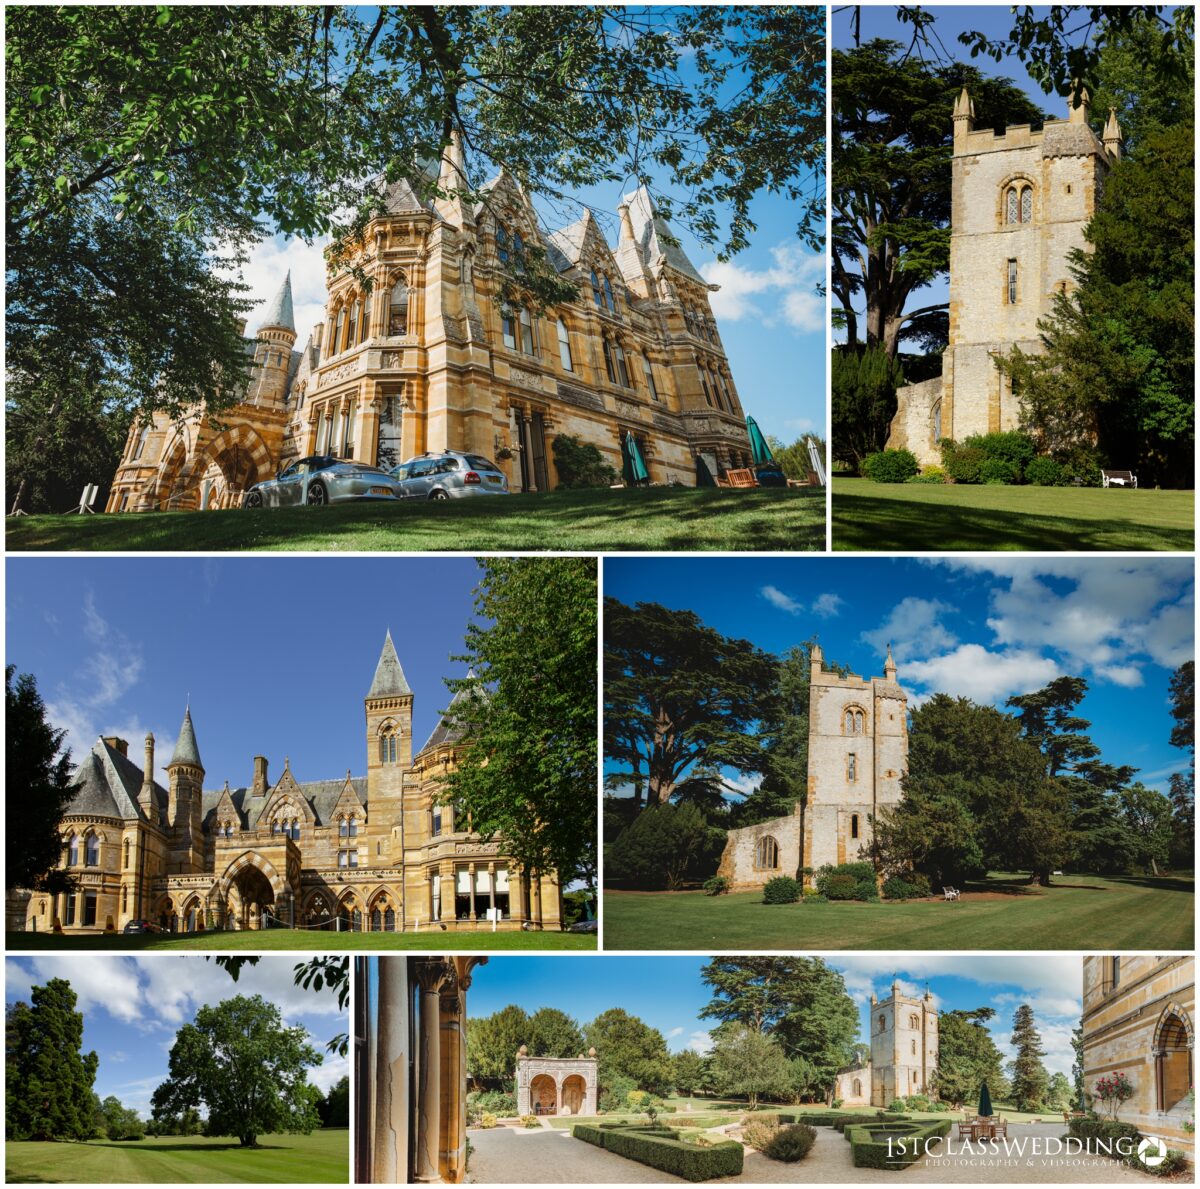 Historic UK mansions and gardens collage.